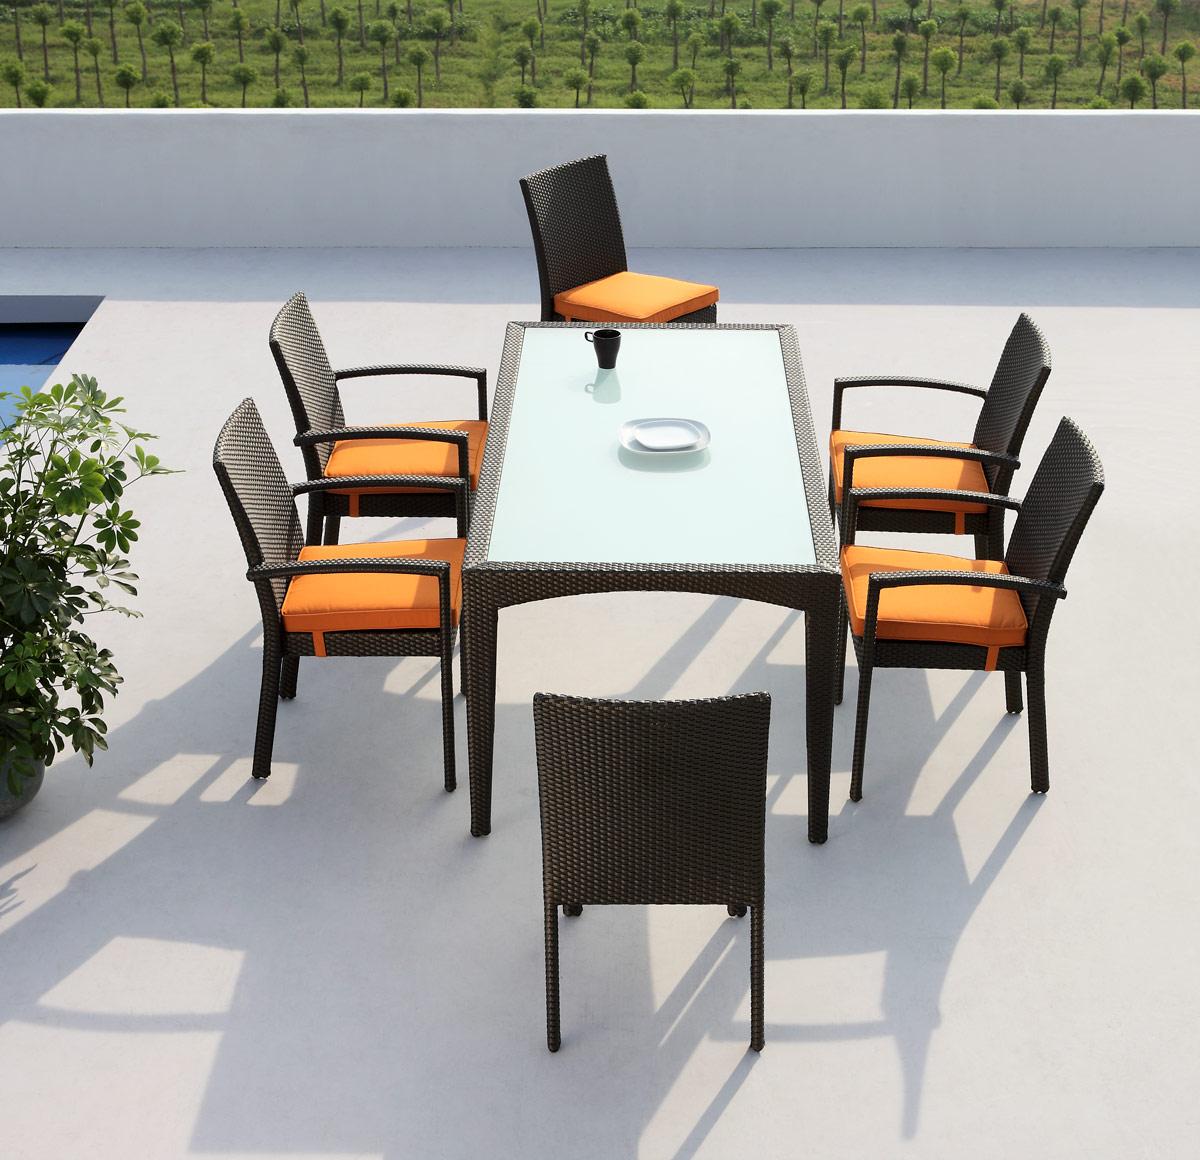 Awesome Terrace Dining Chairs With Rattan And Orange Sofa Best Rattan Table Glass Plate Amazing Outdoor Place With White Paint Ideas Green Plant For Best Natural View Furniture + Accessories